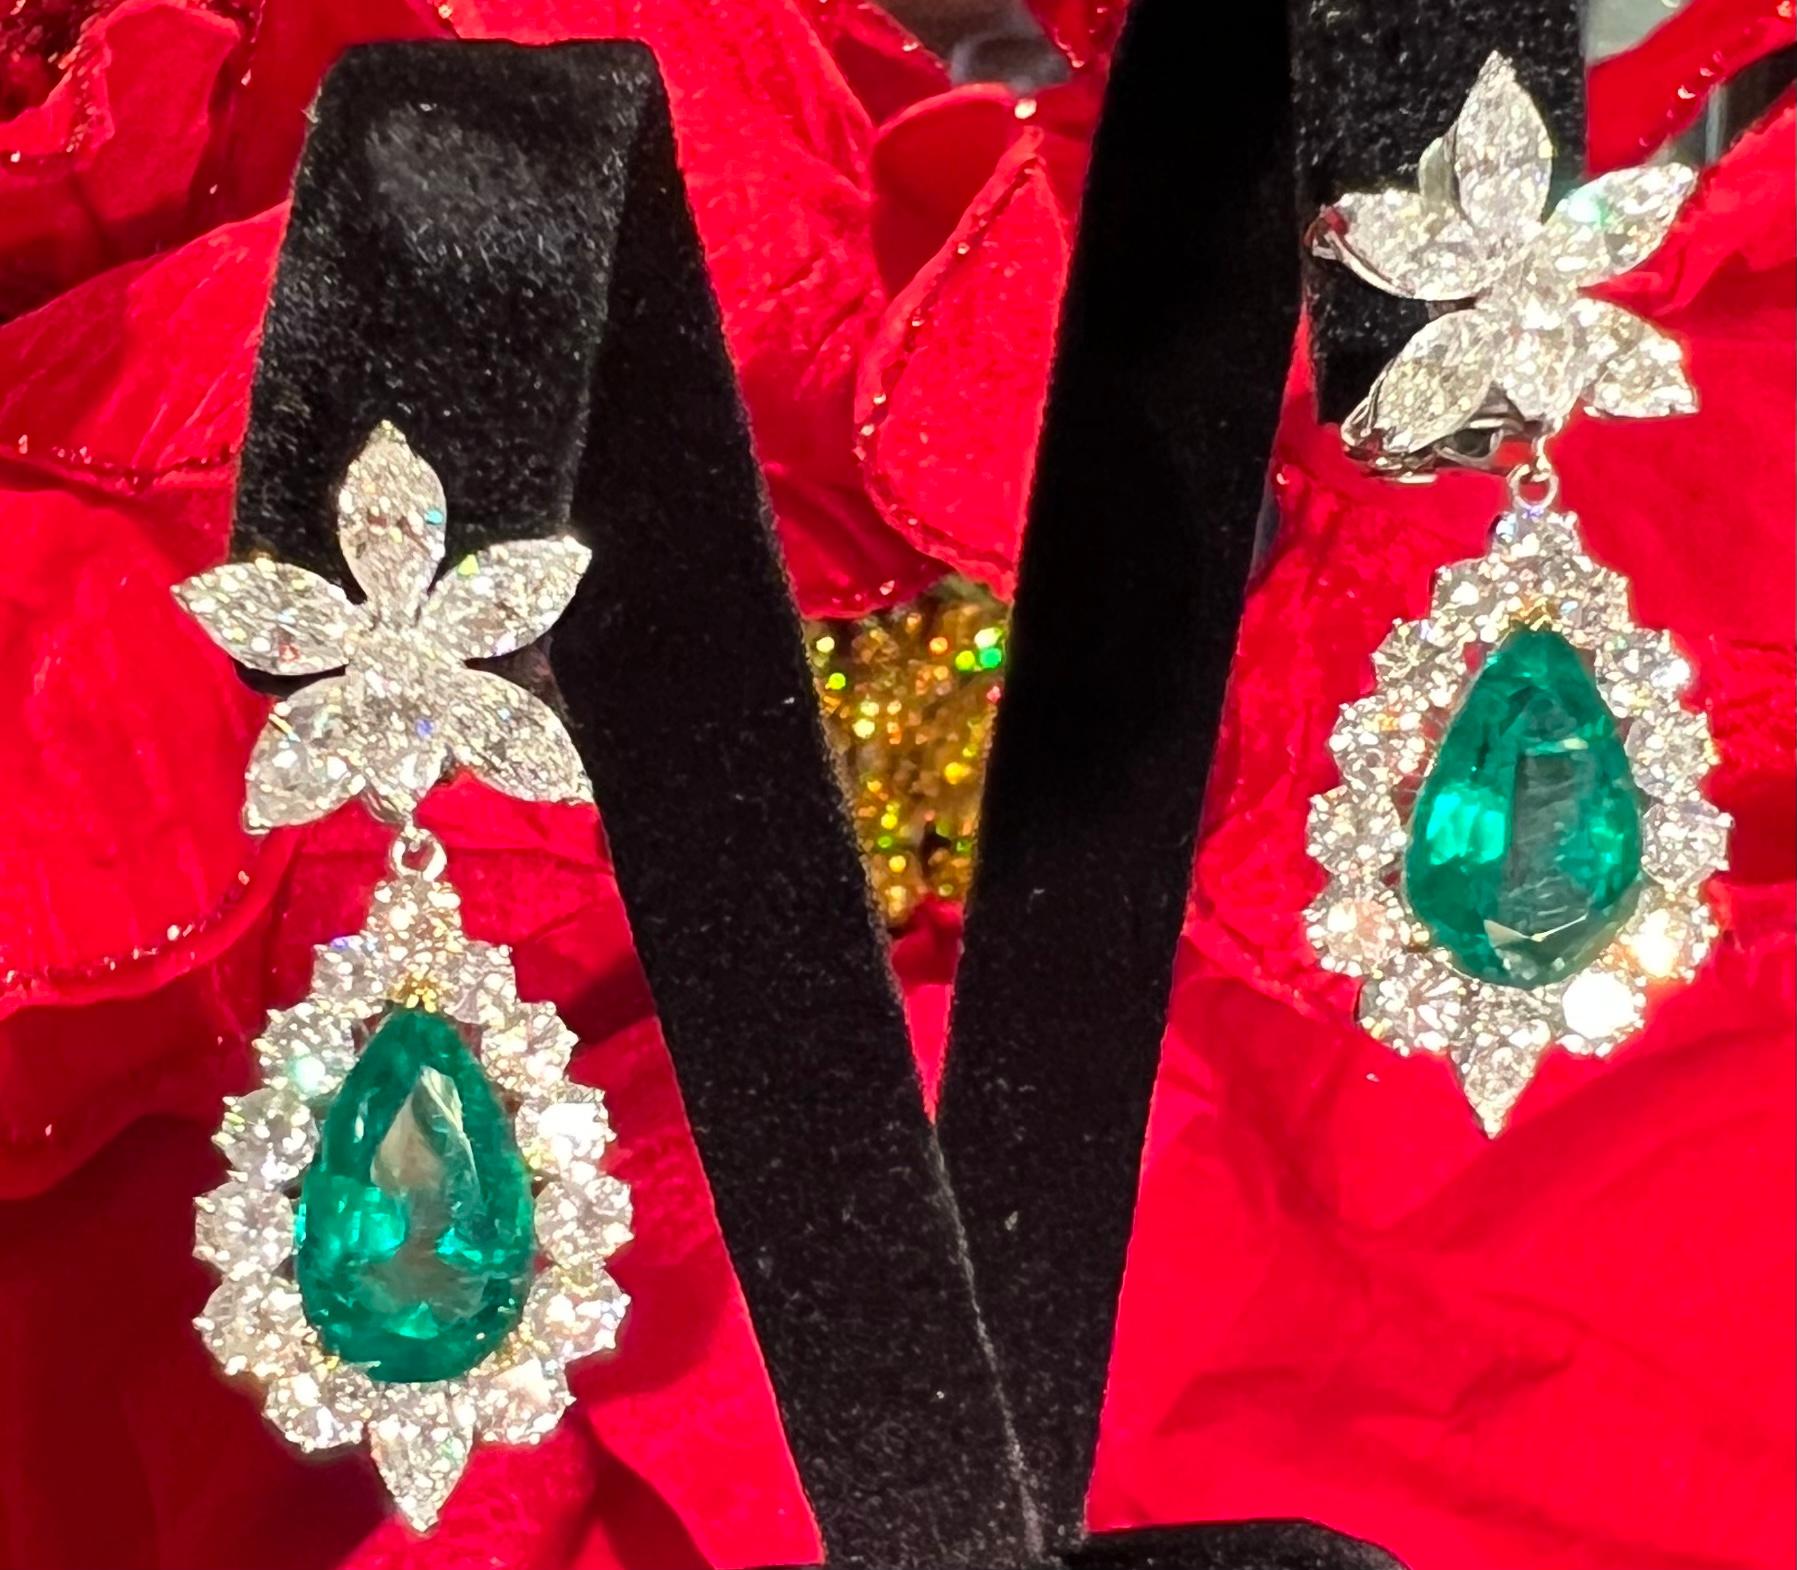 Magnificent pair of very noteworthy 20.88 carat estate Diamond and Emerald Drop Earrings are set in platinum.  These are the most beautiful emerald and diamond earrings I have ever laid my eyes on. The emeralds detach so that the diamond cluster can